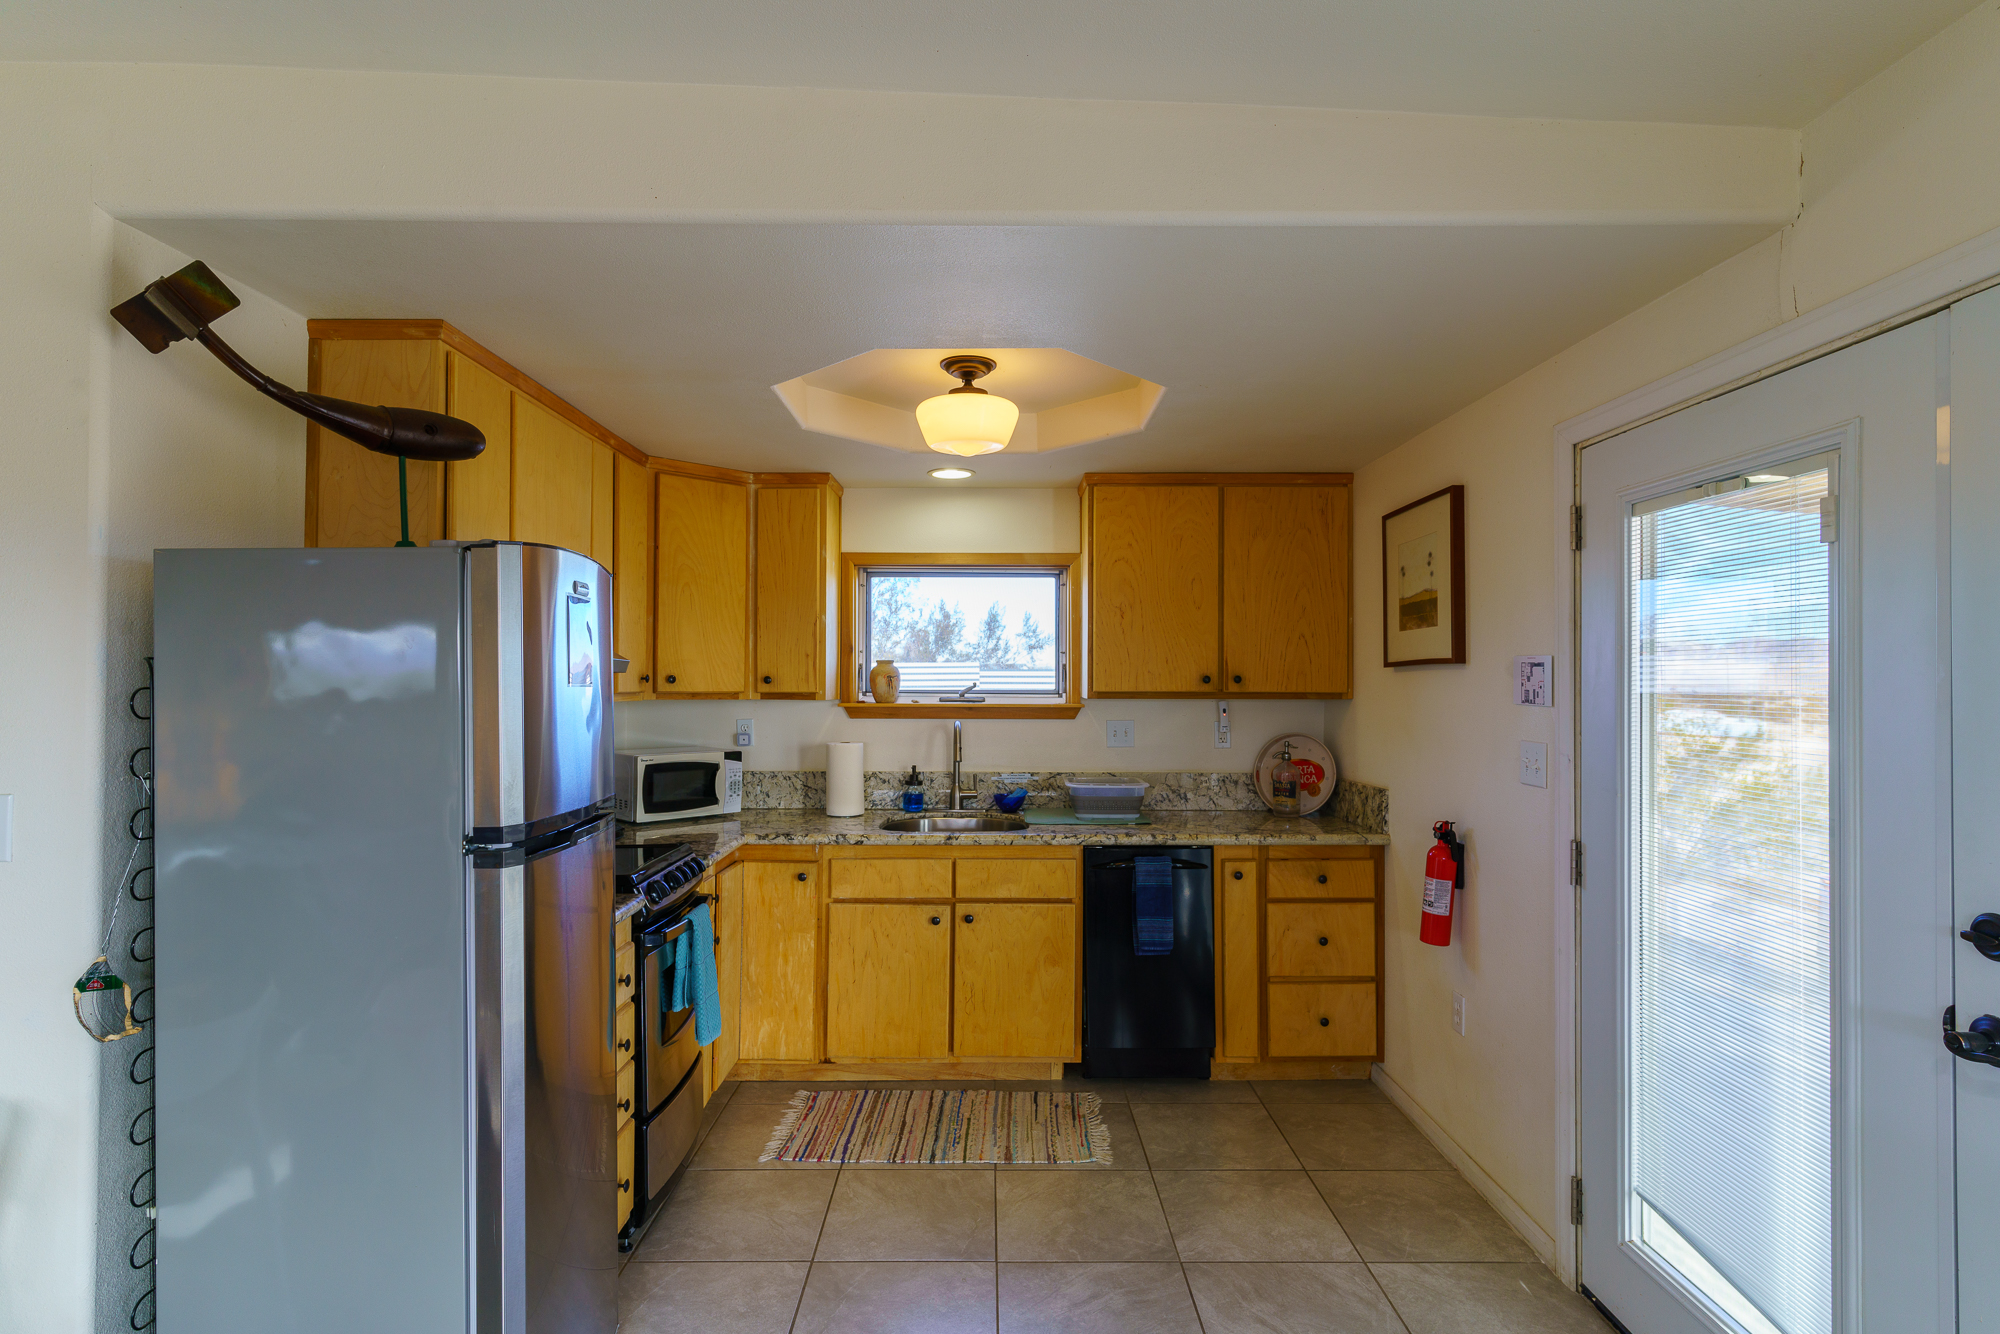 Kitchen of vacation rental with plenty of cabinets and a dishwasher and fire extinguisher to the left.